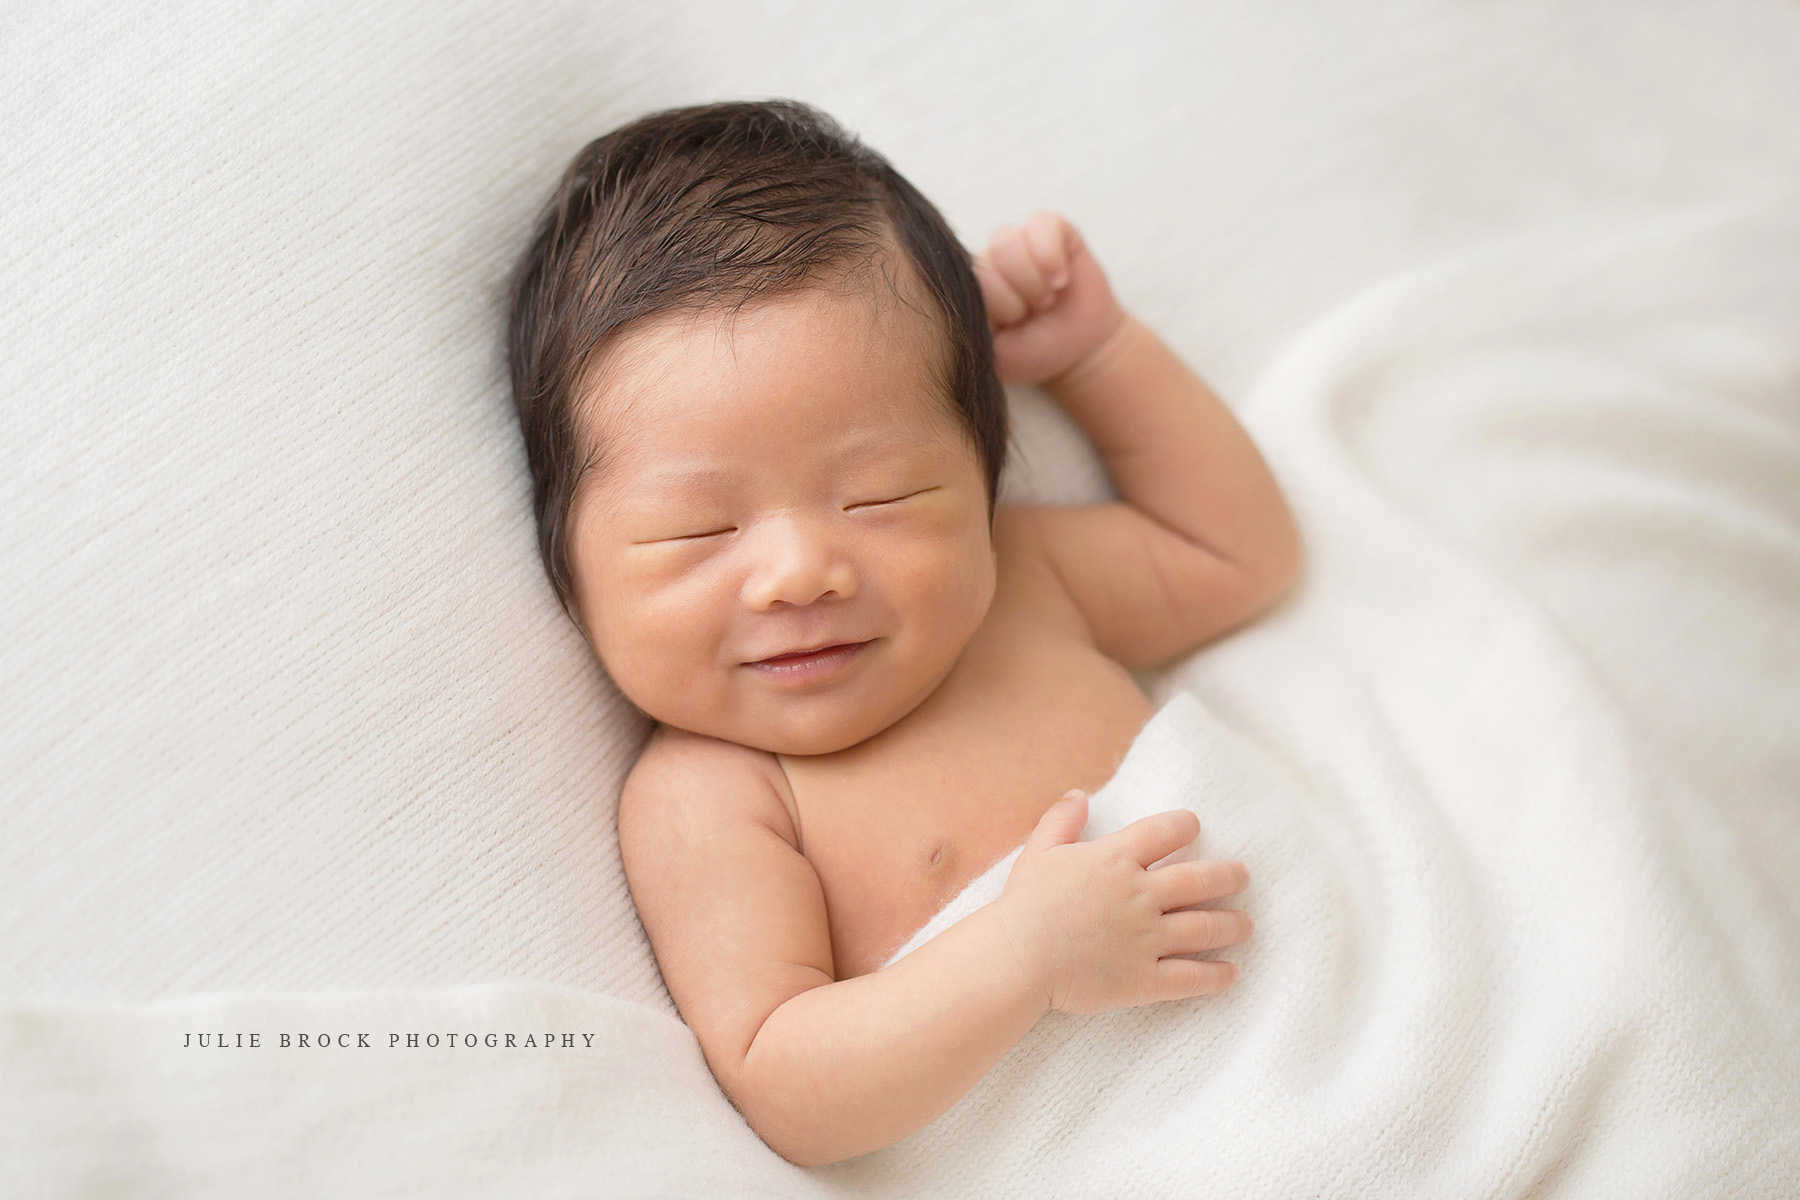 Top Newborn Photographer Louisville KY | Julie Brock Photography | Maternity Session | Baby first year photos | simple posing newborn photo session.jpg